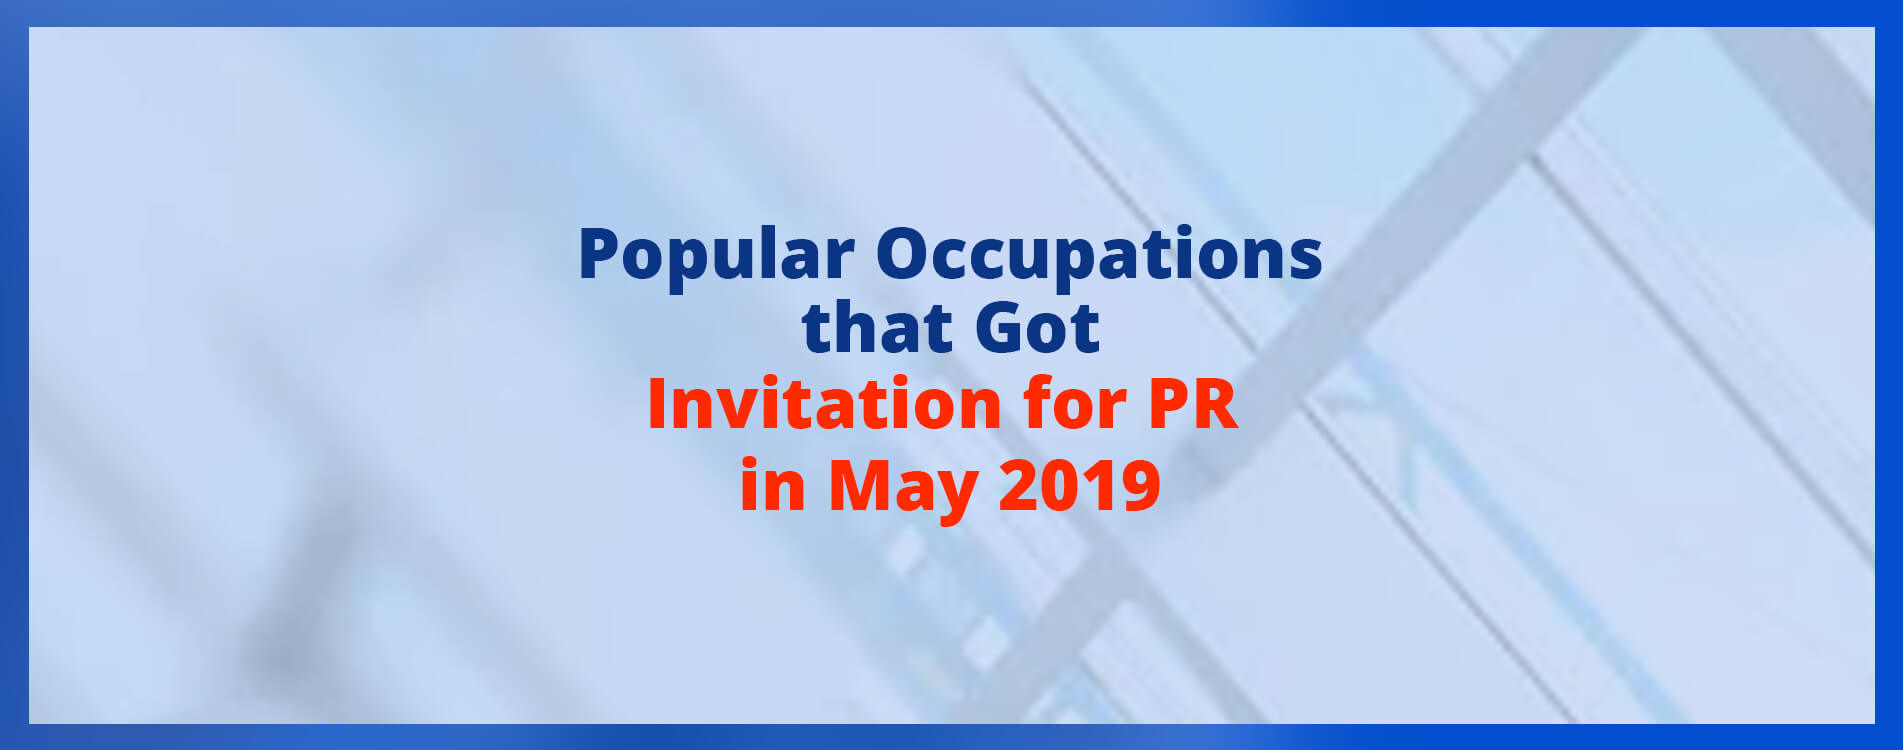 POPULAR OCCUPATIONS THAT GOT PR INVITATIONS IN MAY 2019